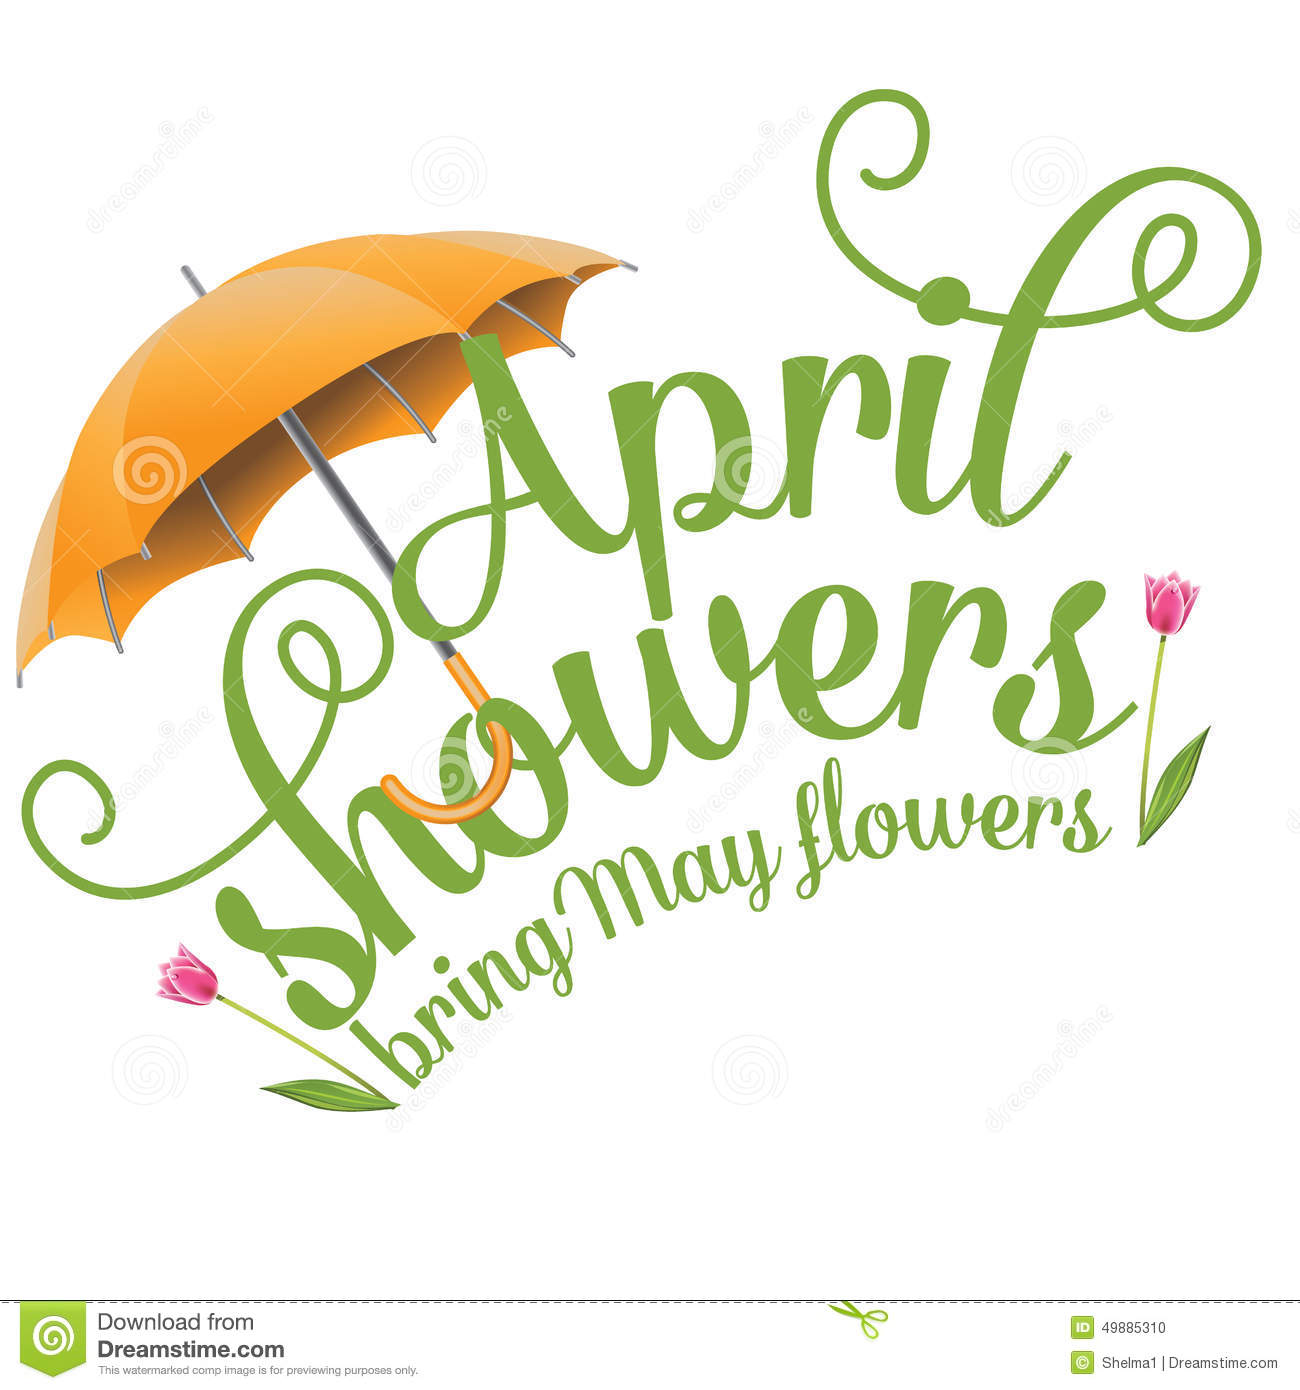 April Clip Art | April Showers Bring May Flowers Design Stock Vector - Image: 49885310 | APRIL | Pinterest | May flowers, Clip art and Spring